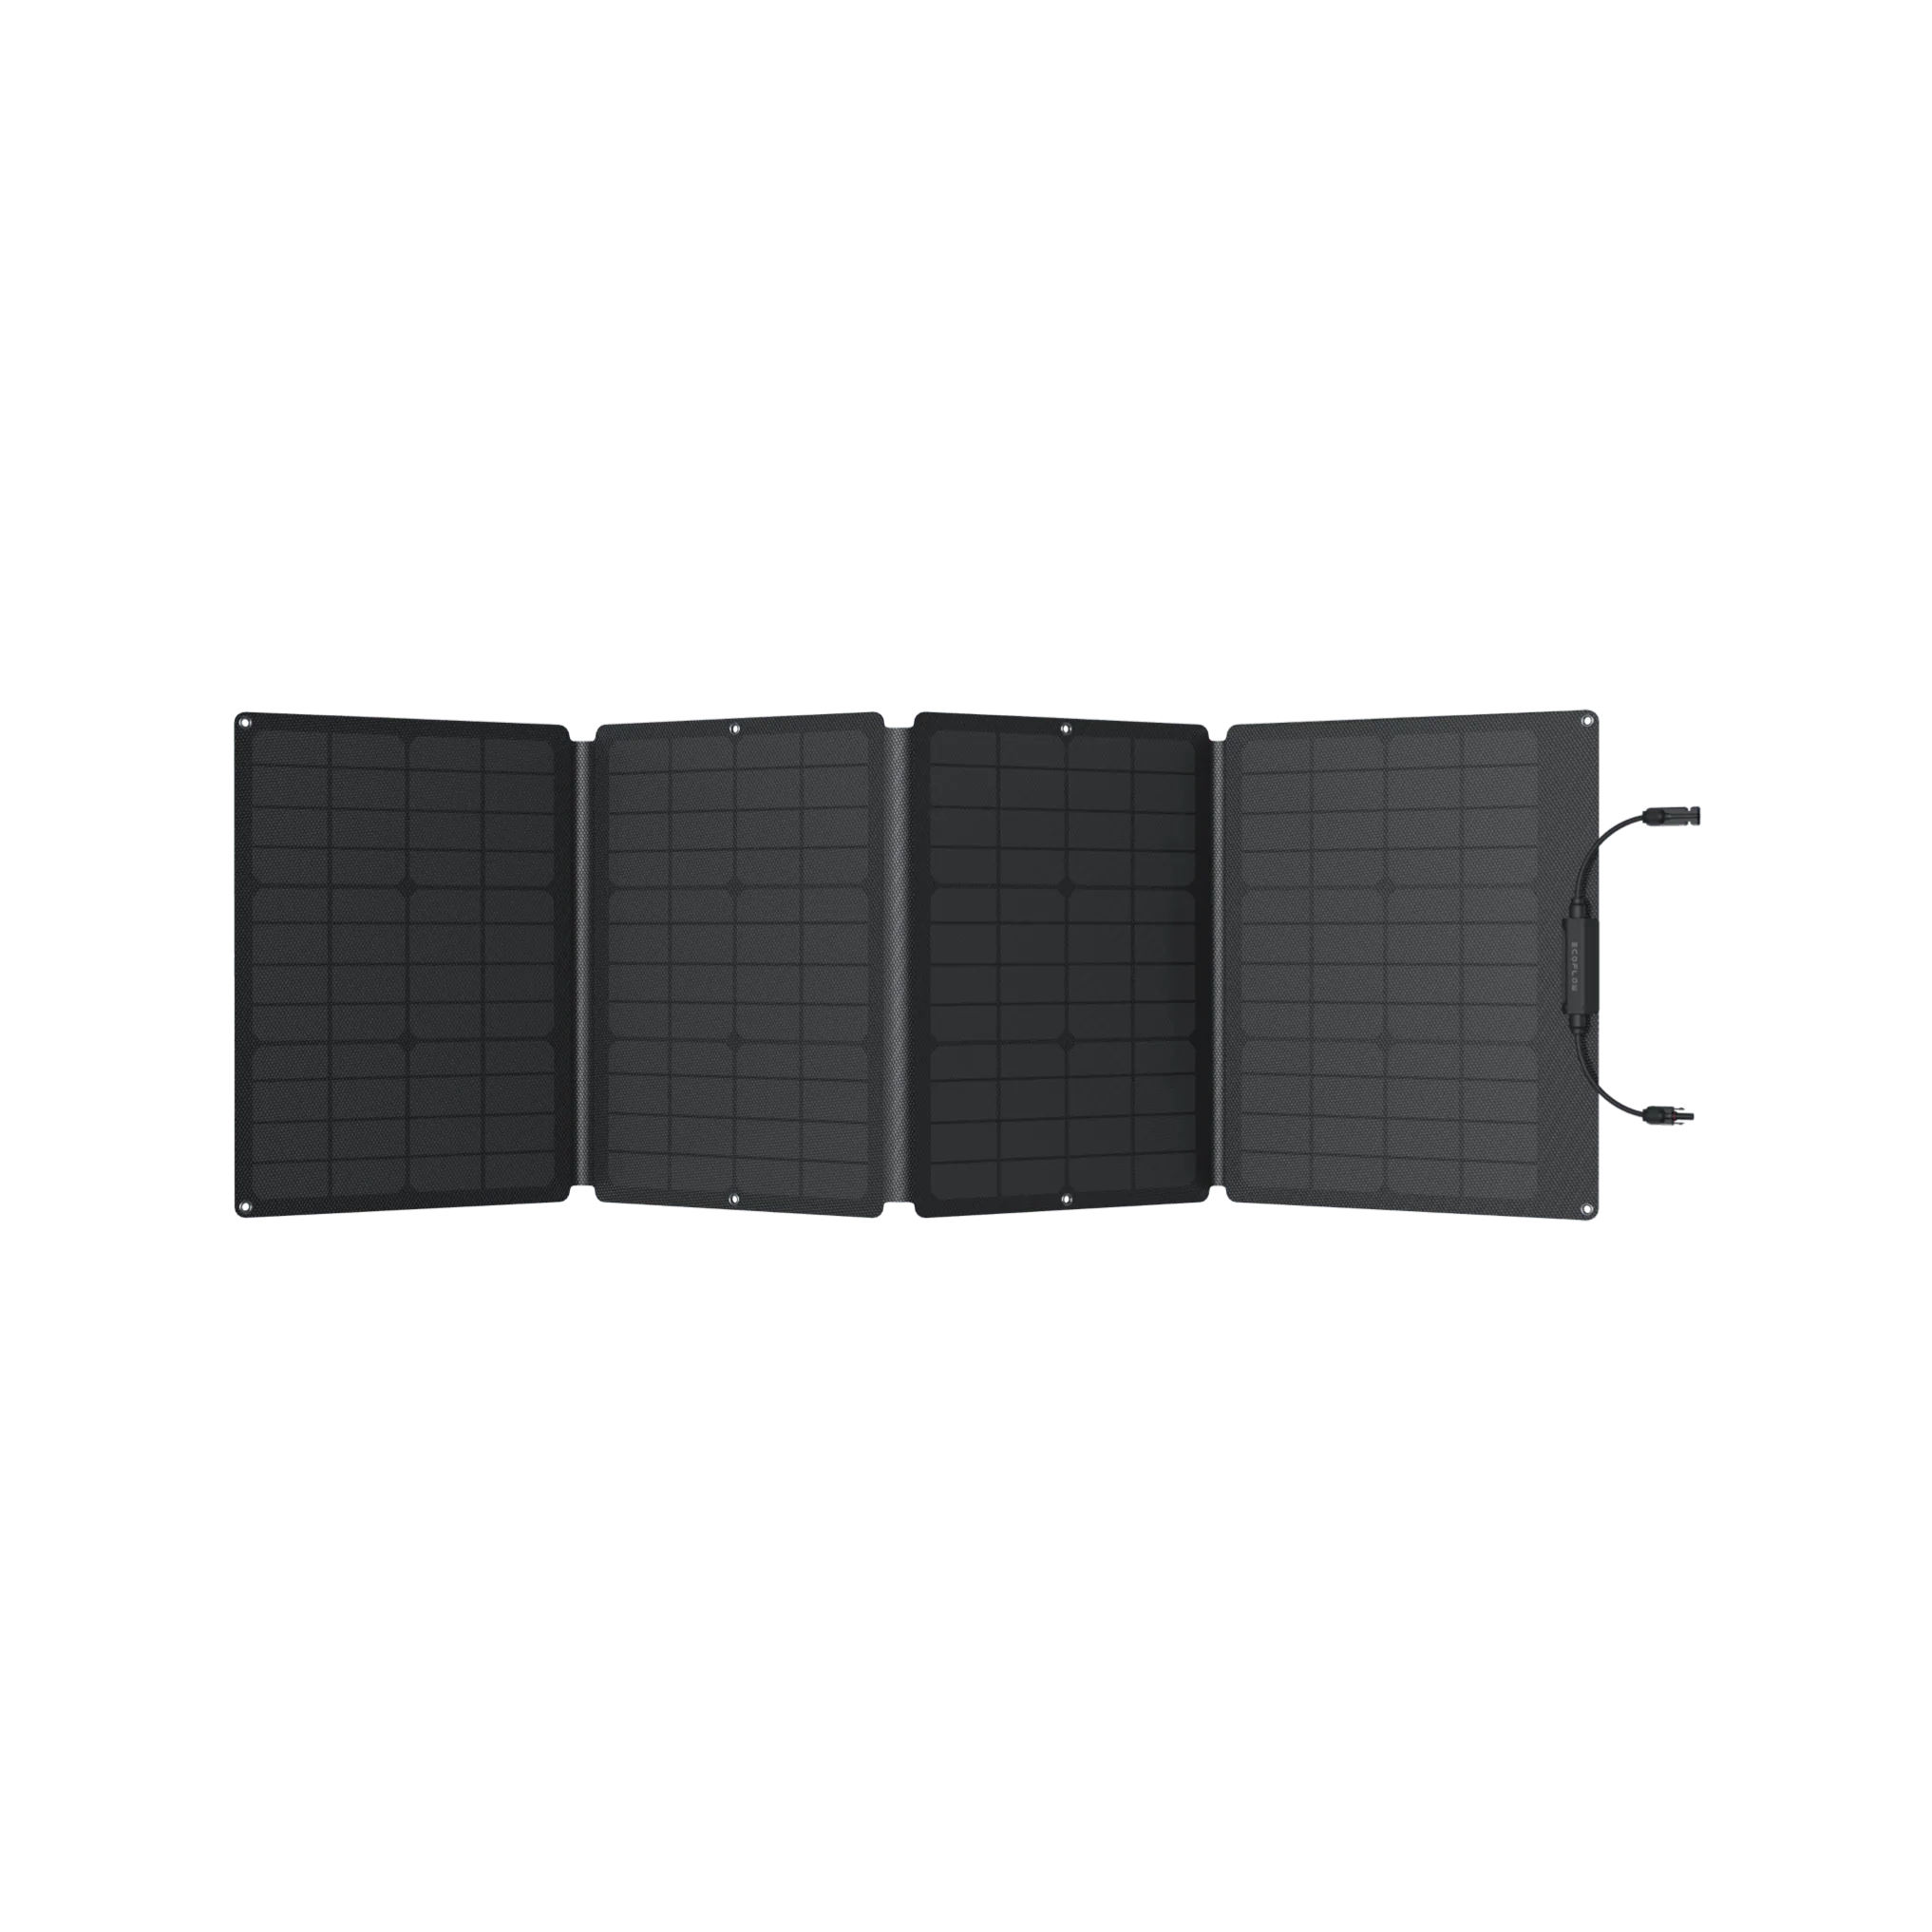 A black solar panel on a white background available for shipping in 1-2 weeks.